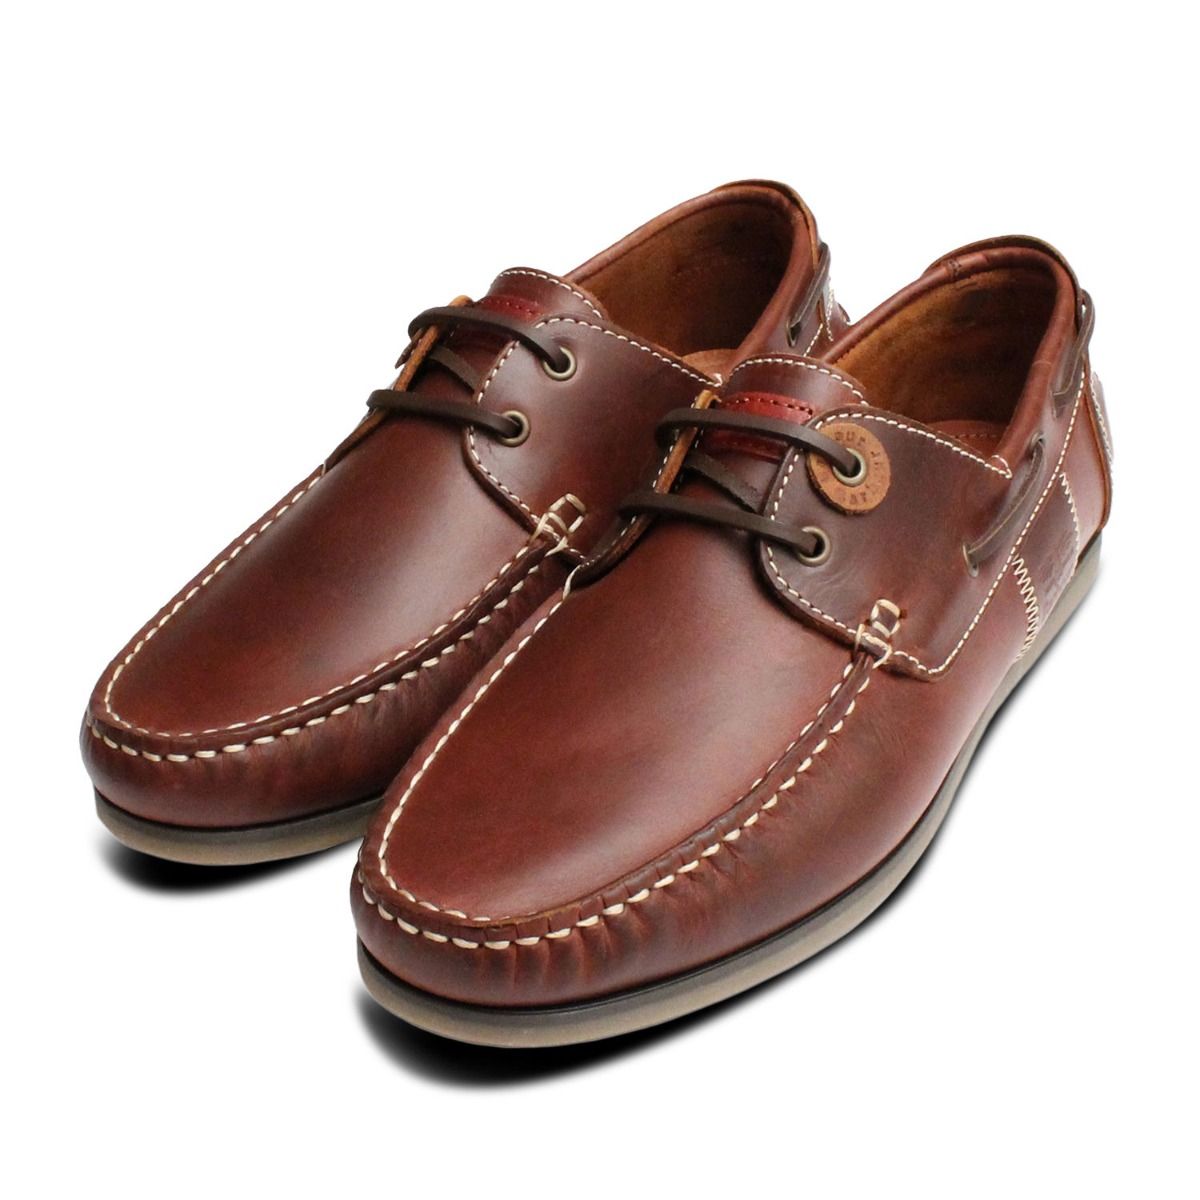 Barbour Waxy Brown Mens Designer Boat Shoes